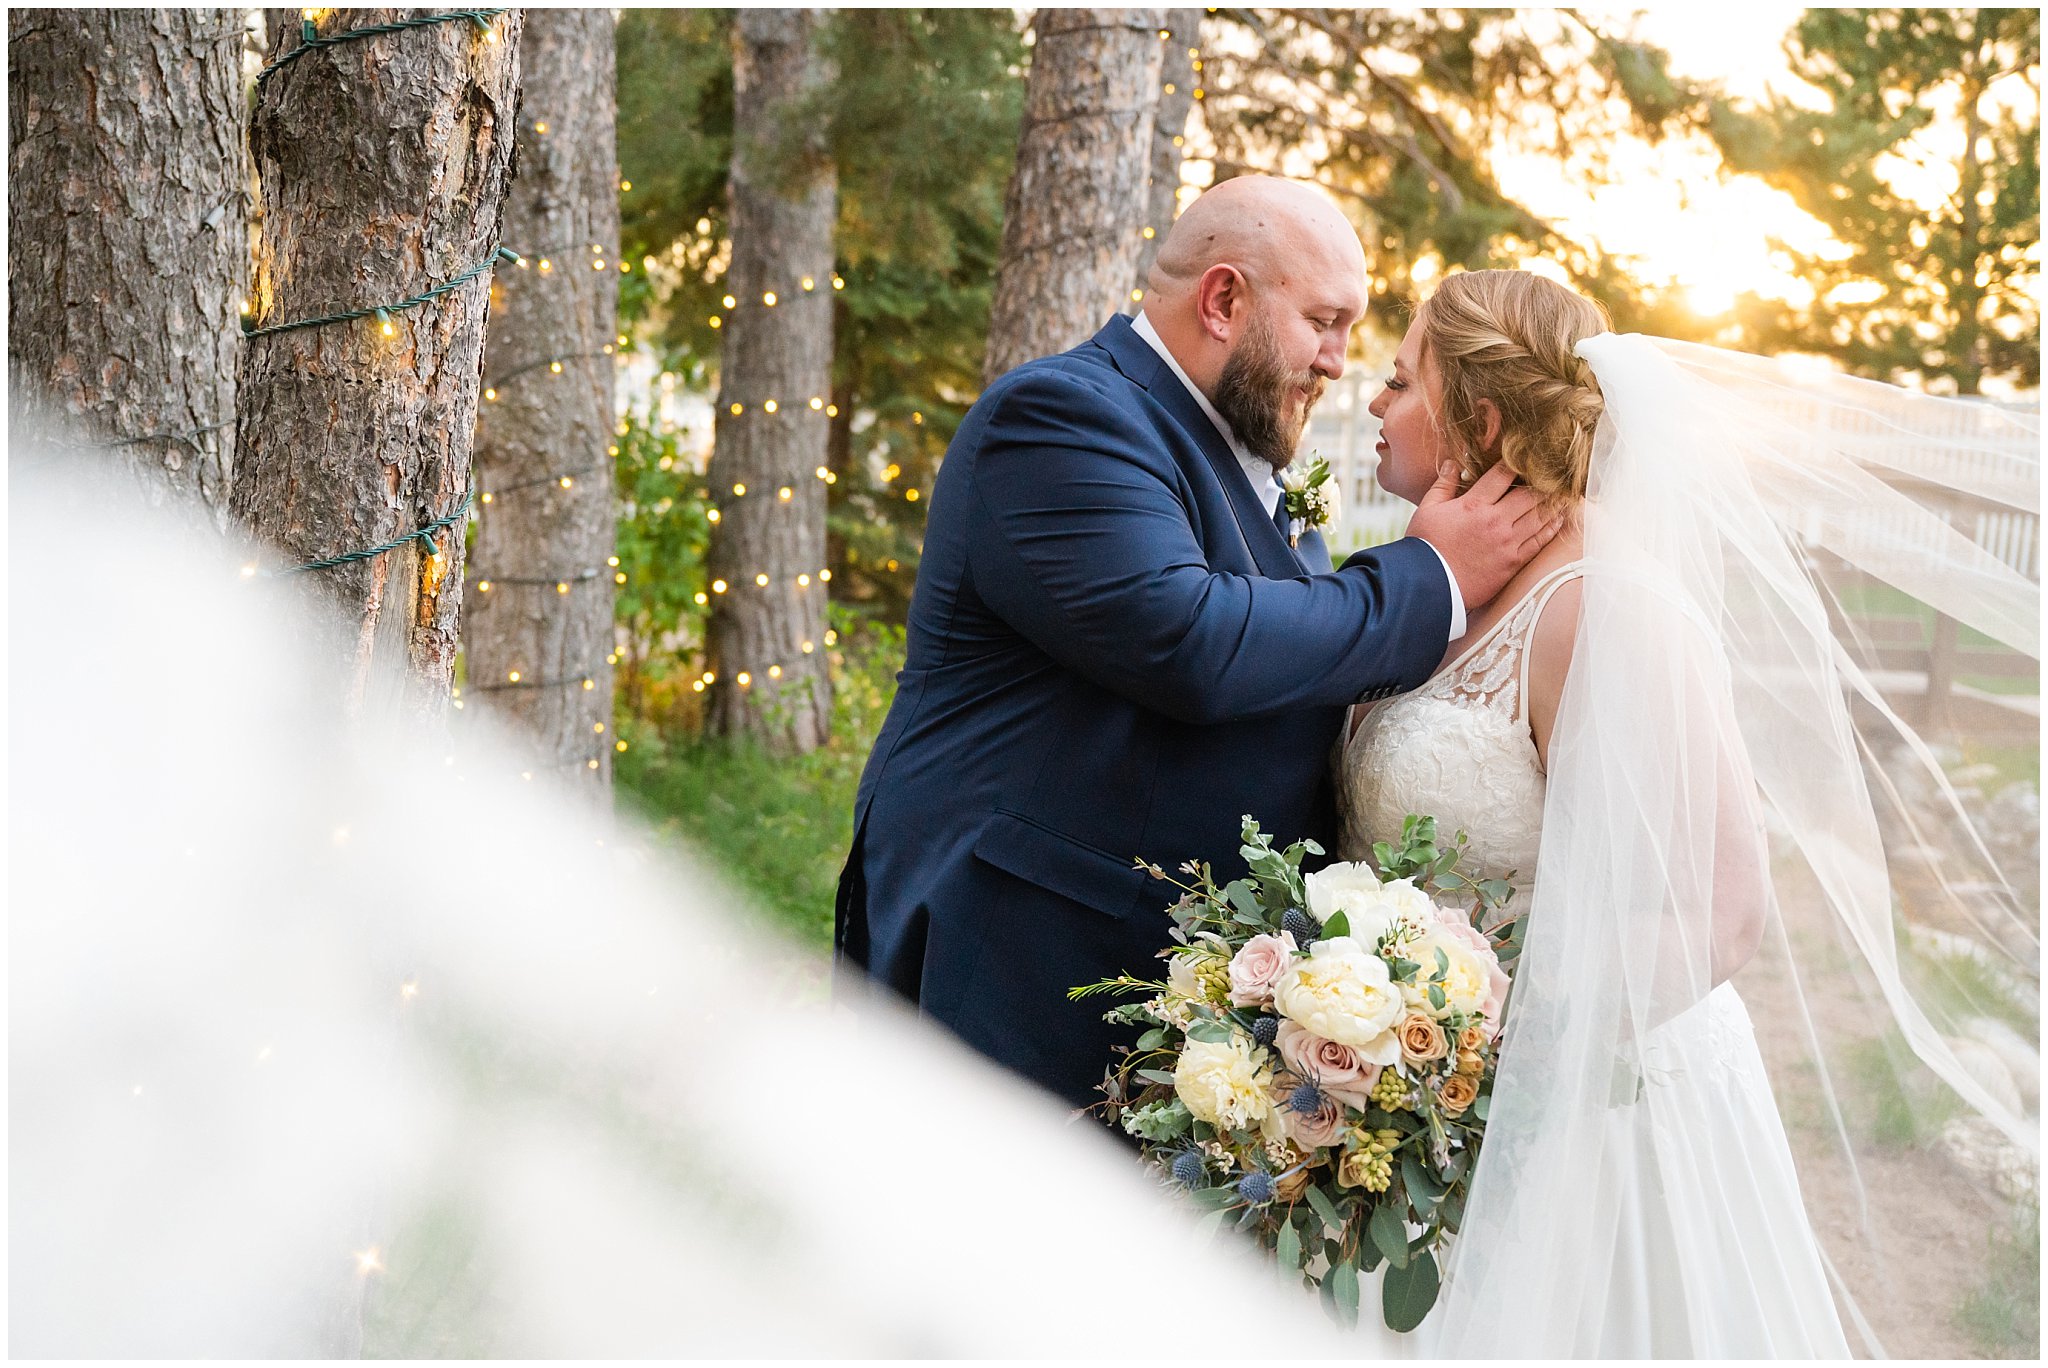 Bride and groom portraits in the trees | Spring Mountain Wedding at Oak Hills Utah